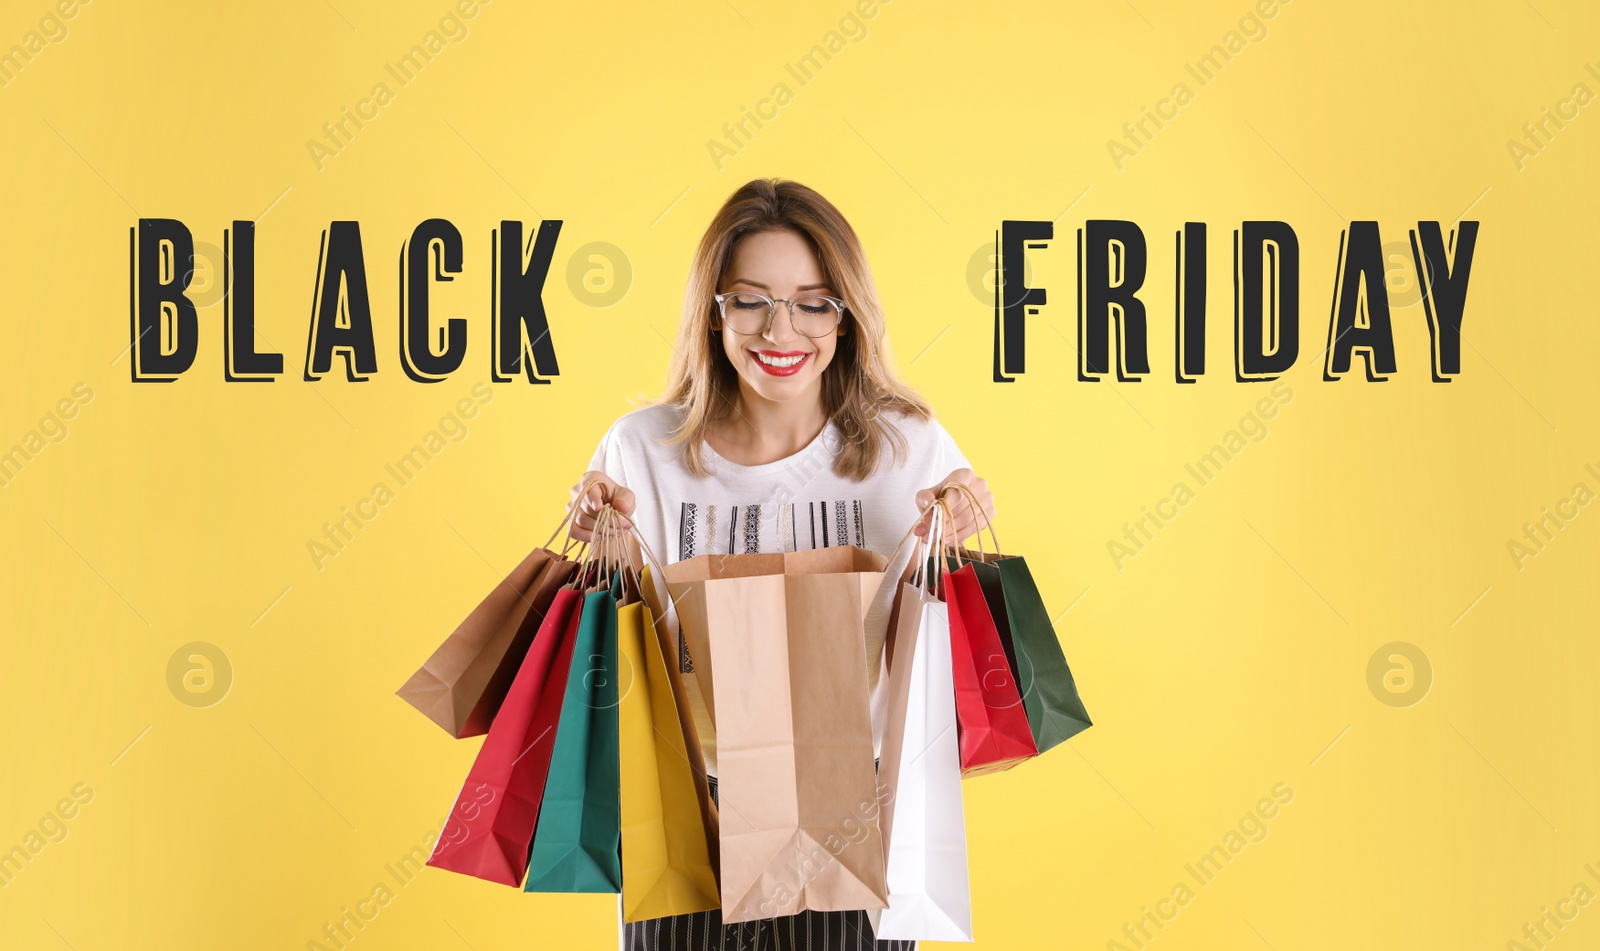 Image of Black Friday Sale. Beautiful young woman with shopping bags on yellow background